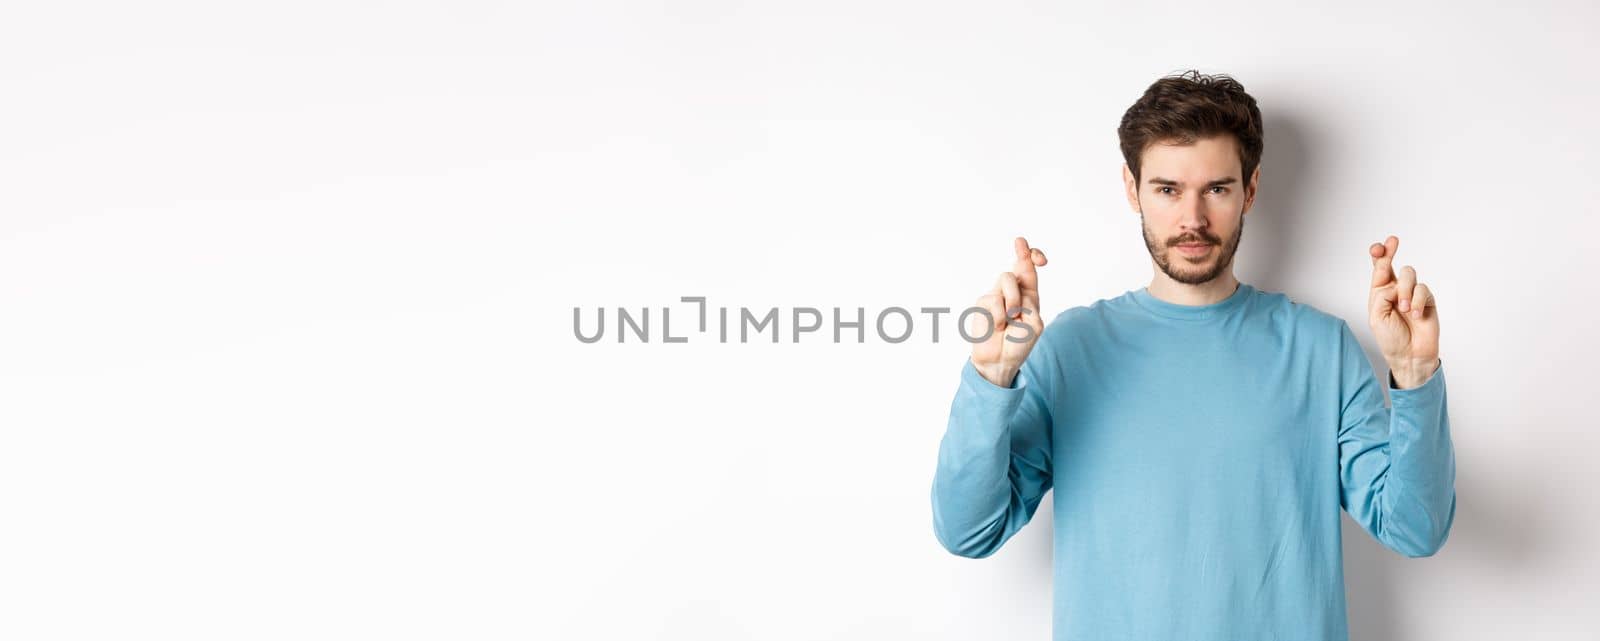 Hopeful and confident young man cross fingers for good luck, making wish or praying, anticipating results, standing over white background.